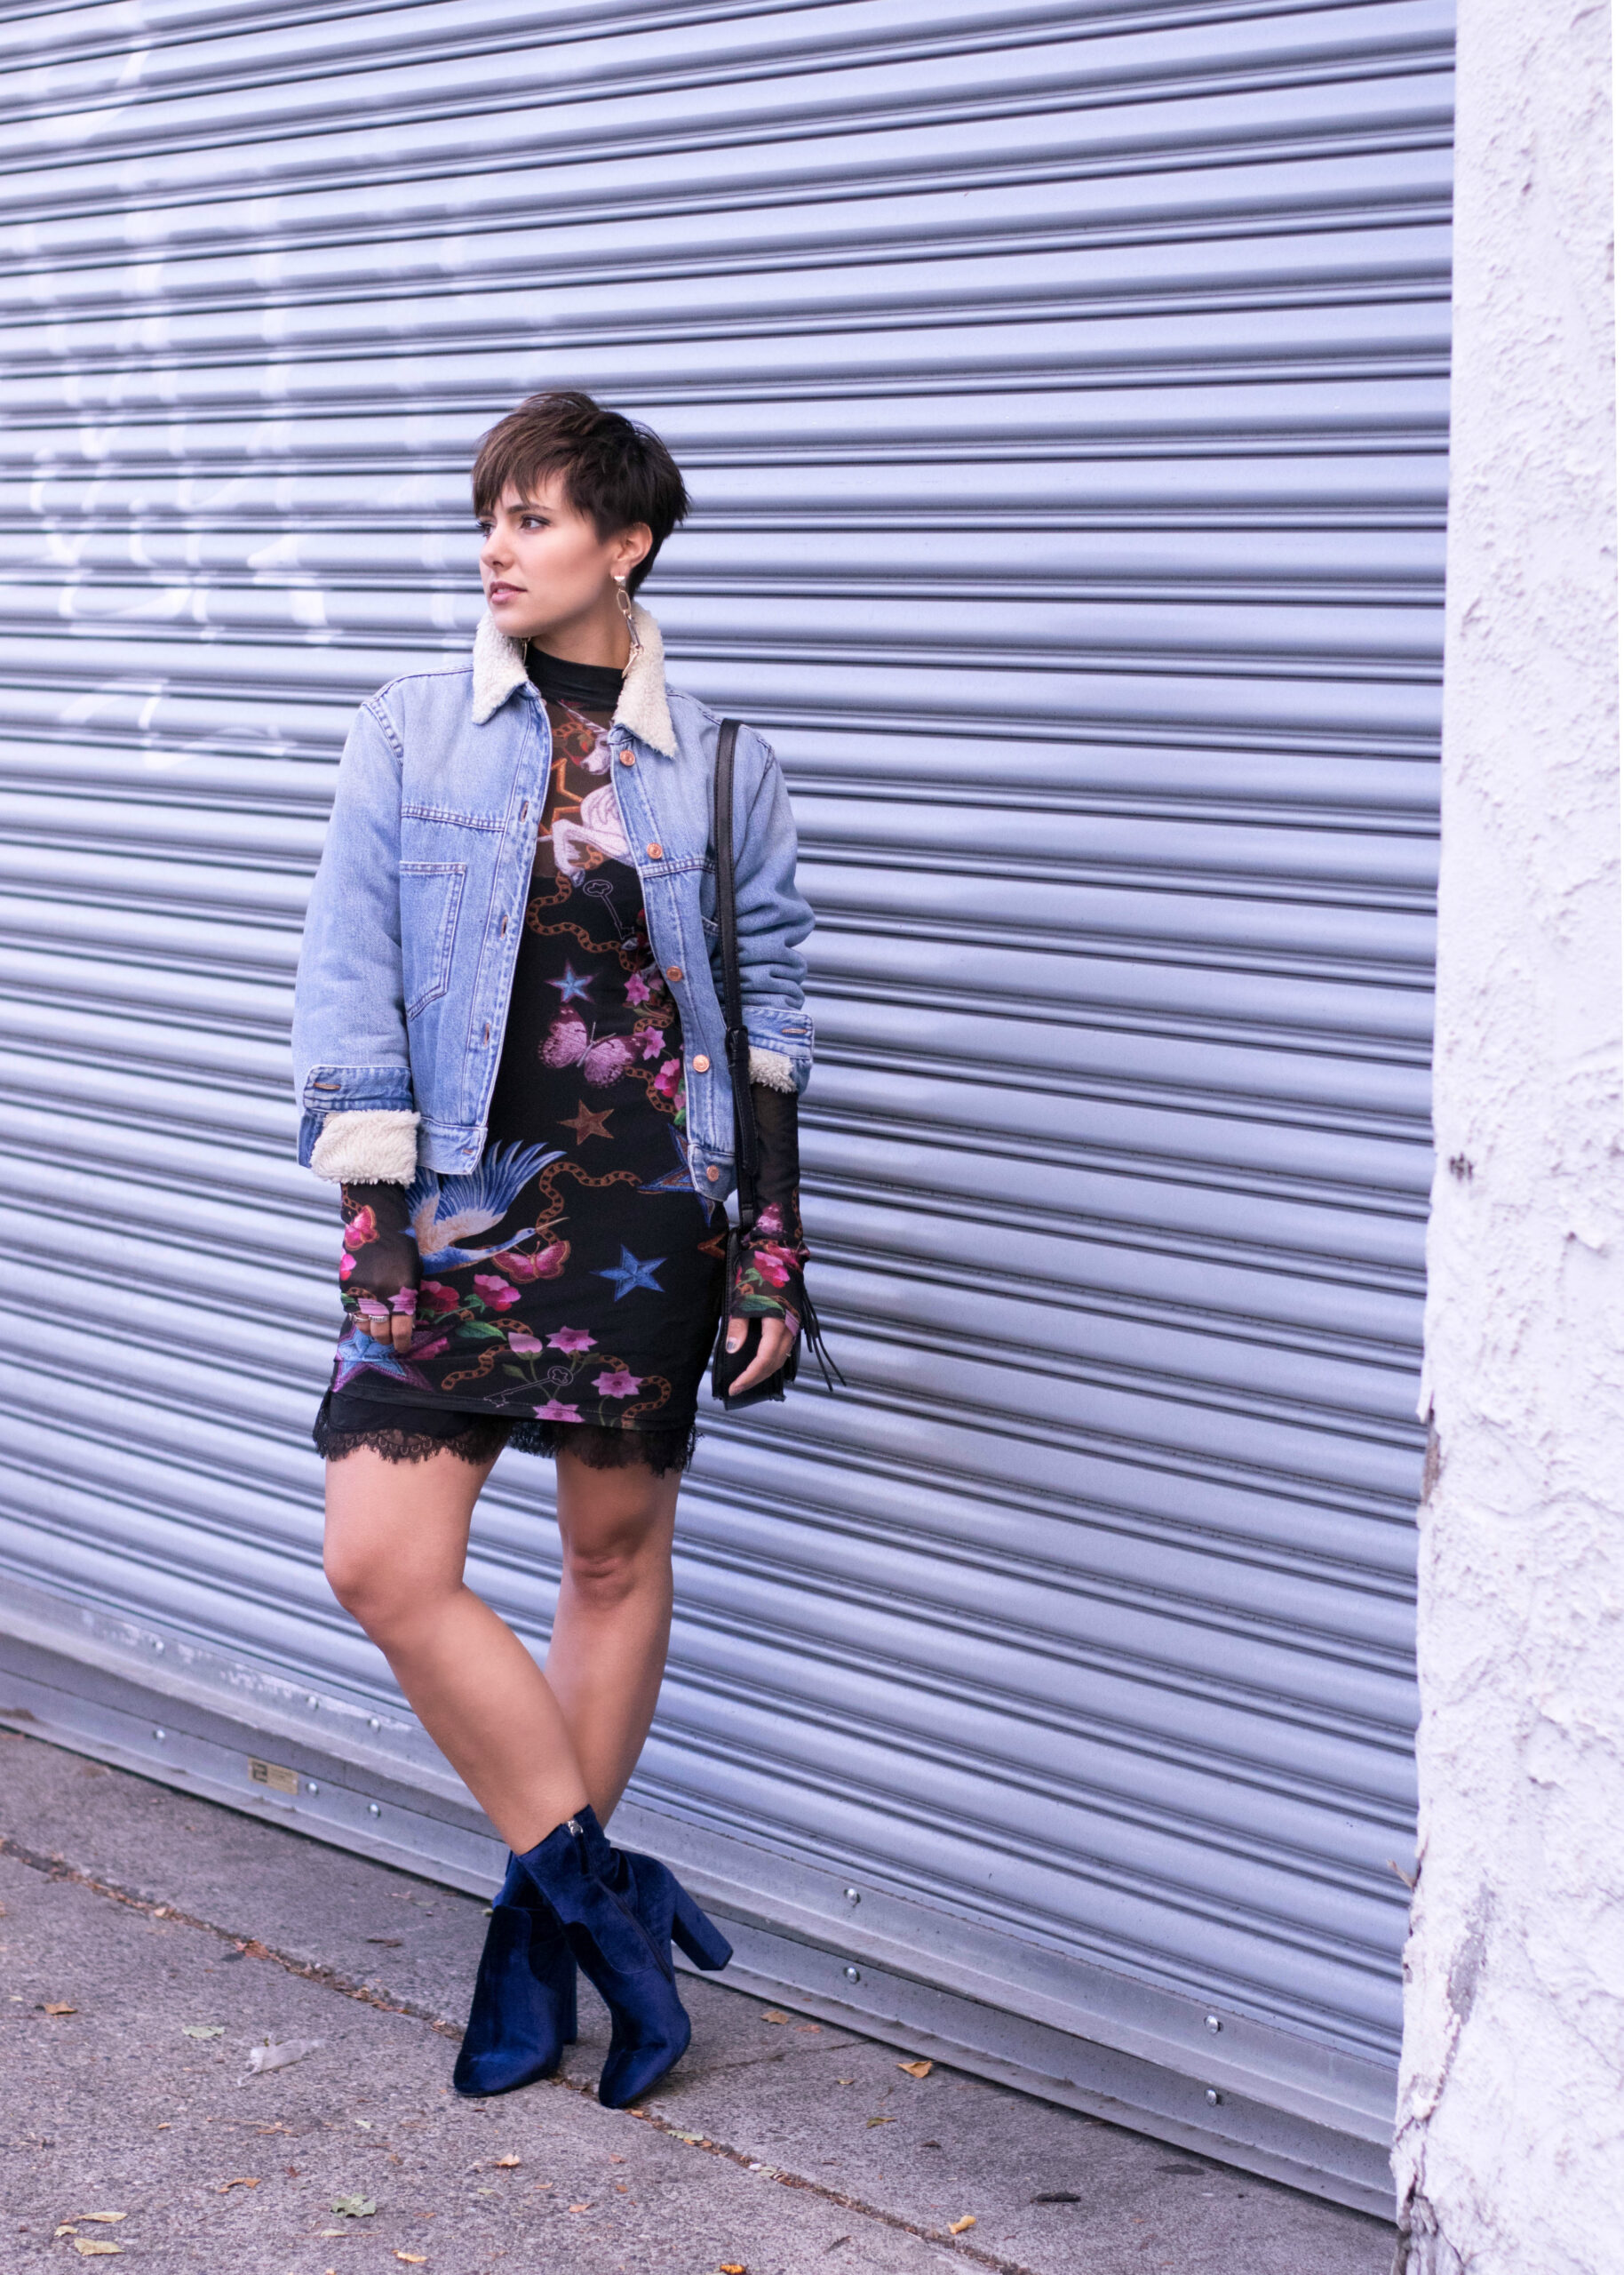 New York Fashion Week Inspired OOTD & The Only Shoes You Need This Fall